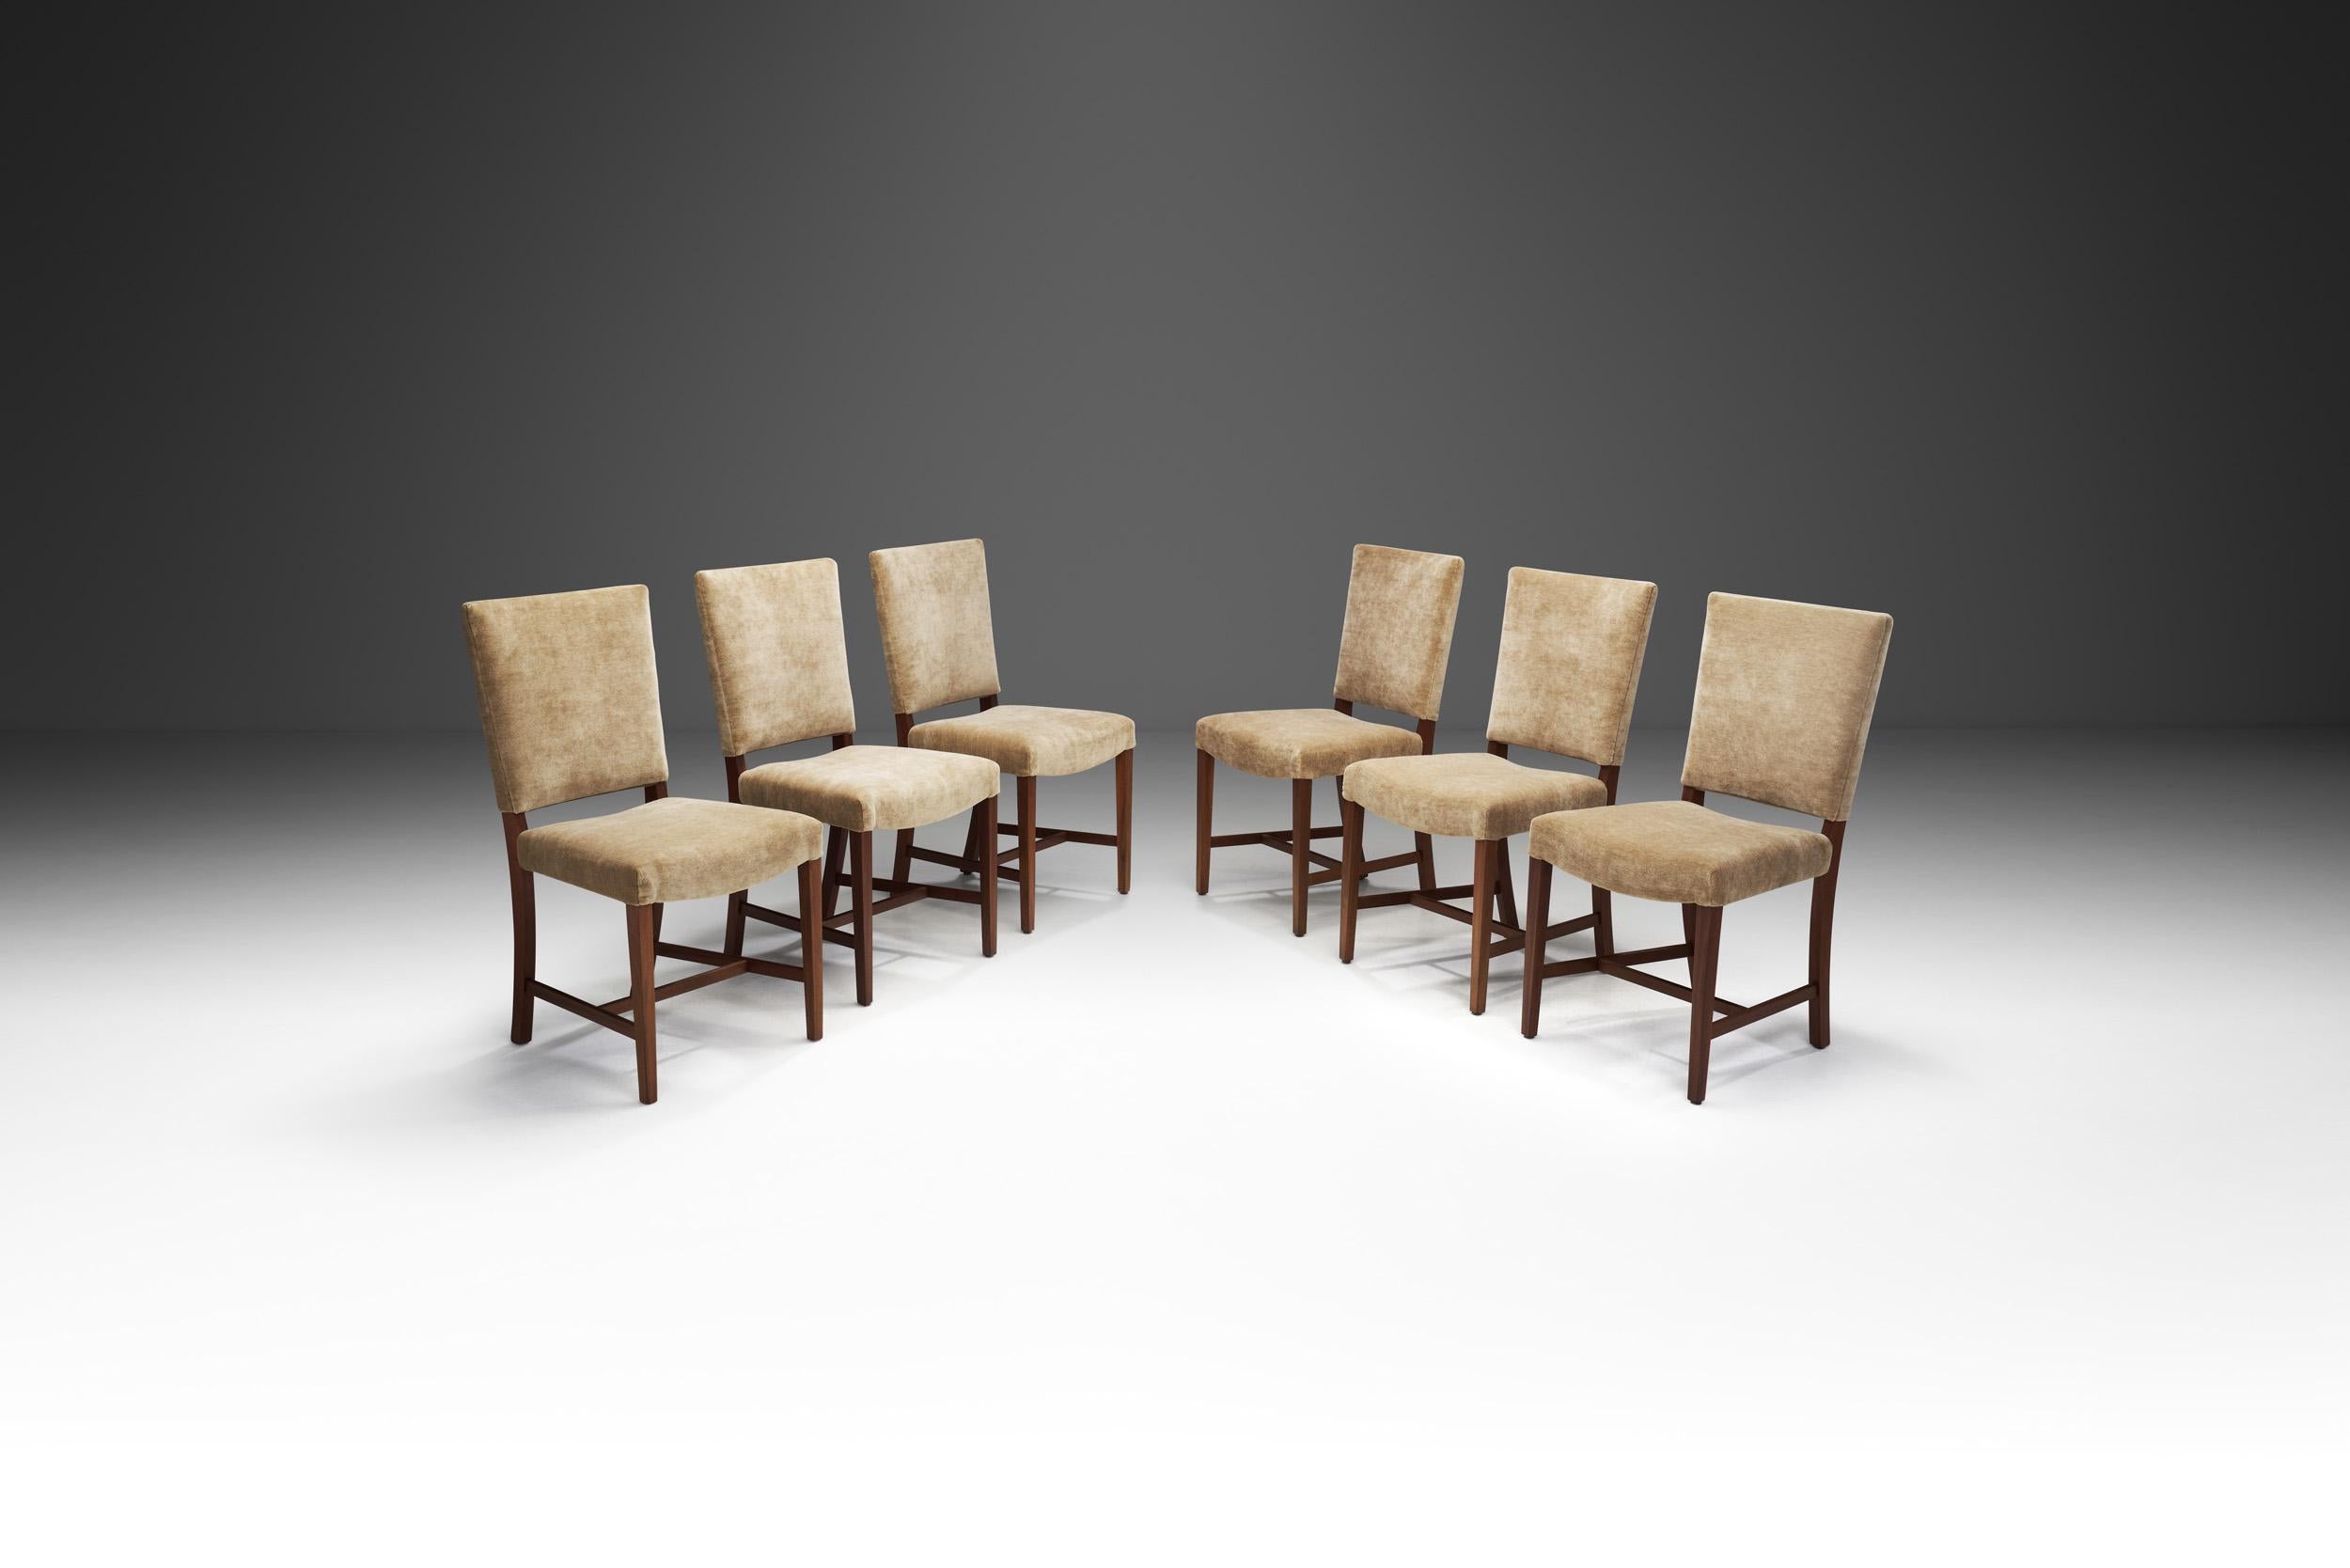 ‎This set of six dining chairs are attributed to the Danish designer and master cabinetmaker, Jacob Kjær. He was a true “snedkermester”, a title given to the most excellent furniture makers. The chairs hail from the old Amtsgaard (county court) of